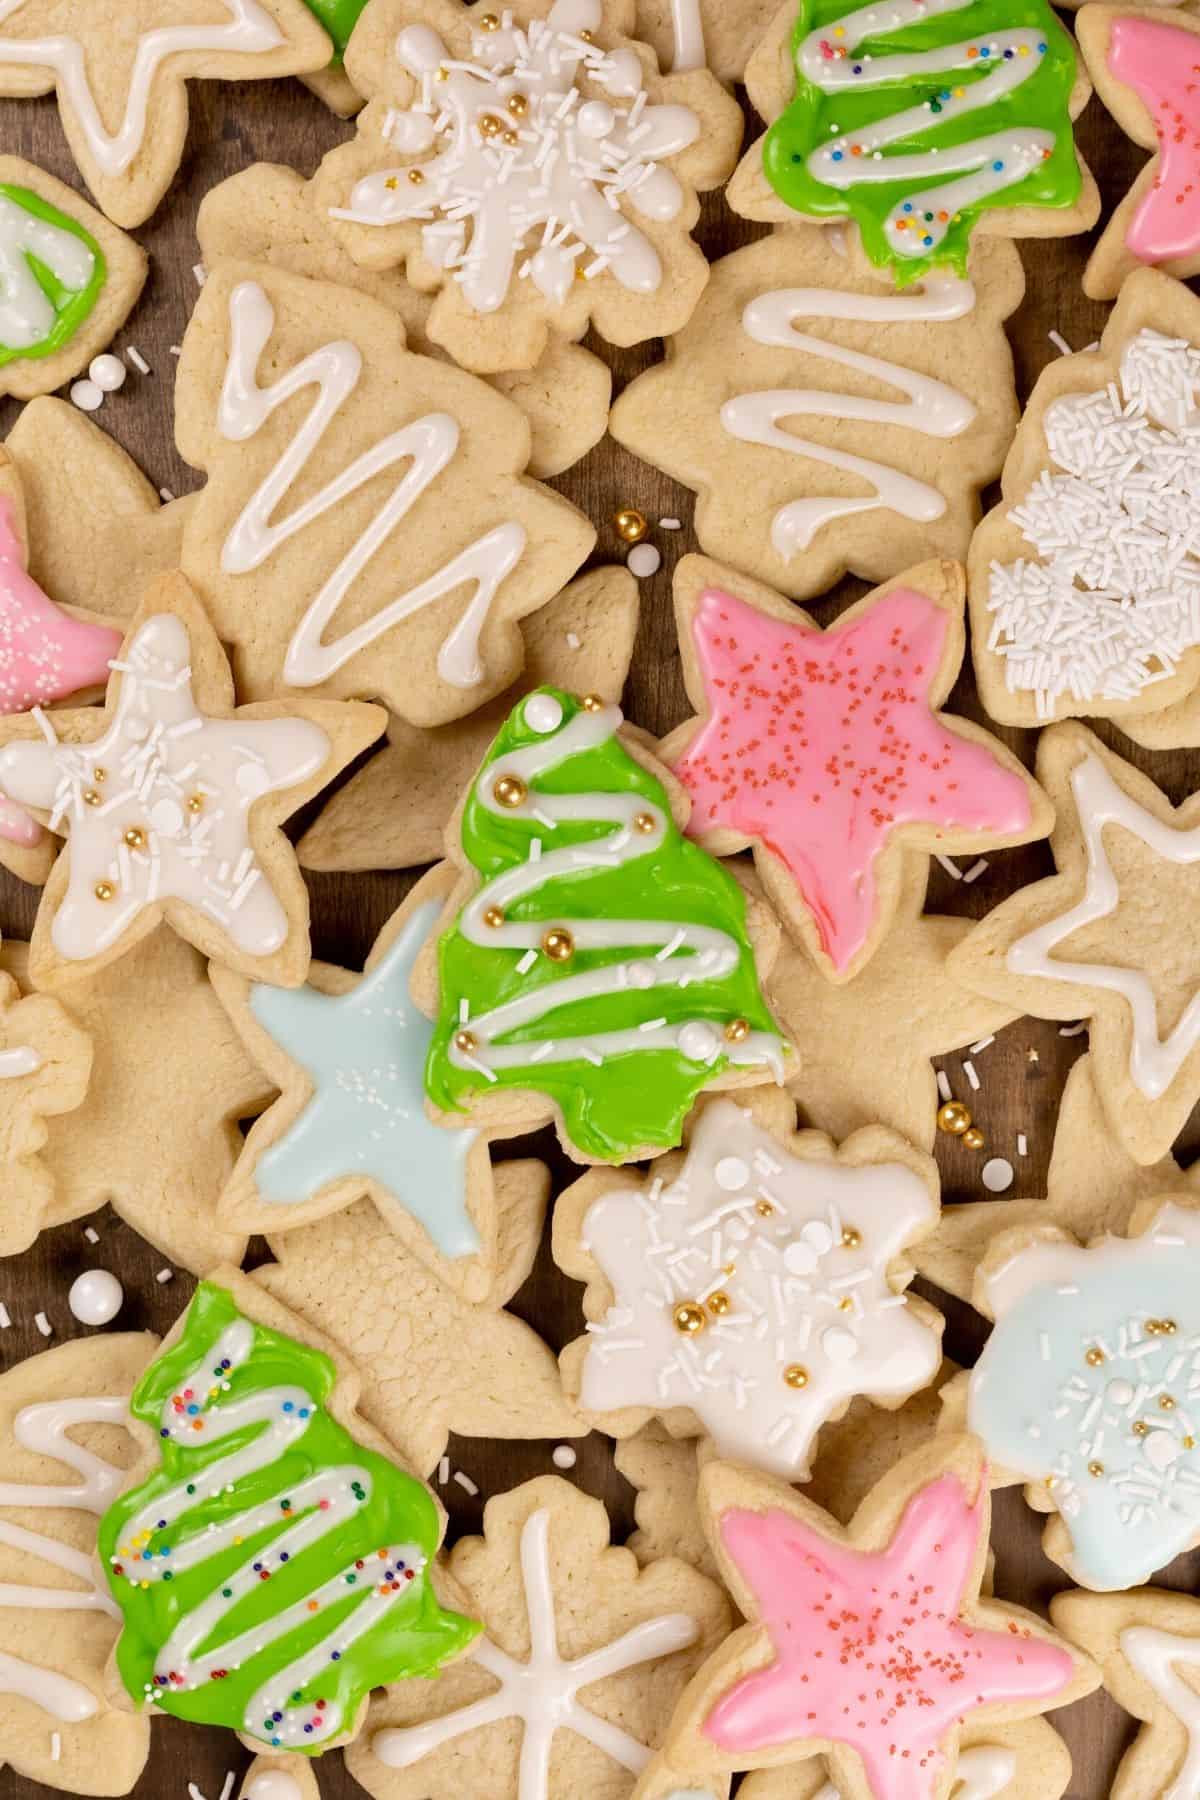 a large pile of Christmas sugar cookies stacked on top of each other in various shapes like trees, stars, and snowflakes. some are covered in pastel frosting with sprinkles and some are plain.